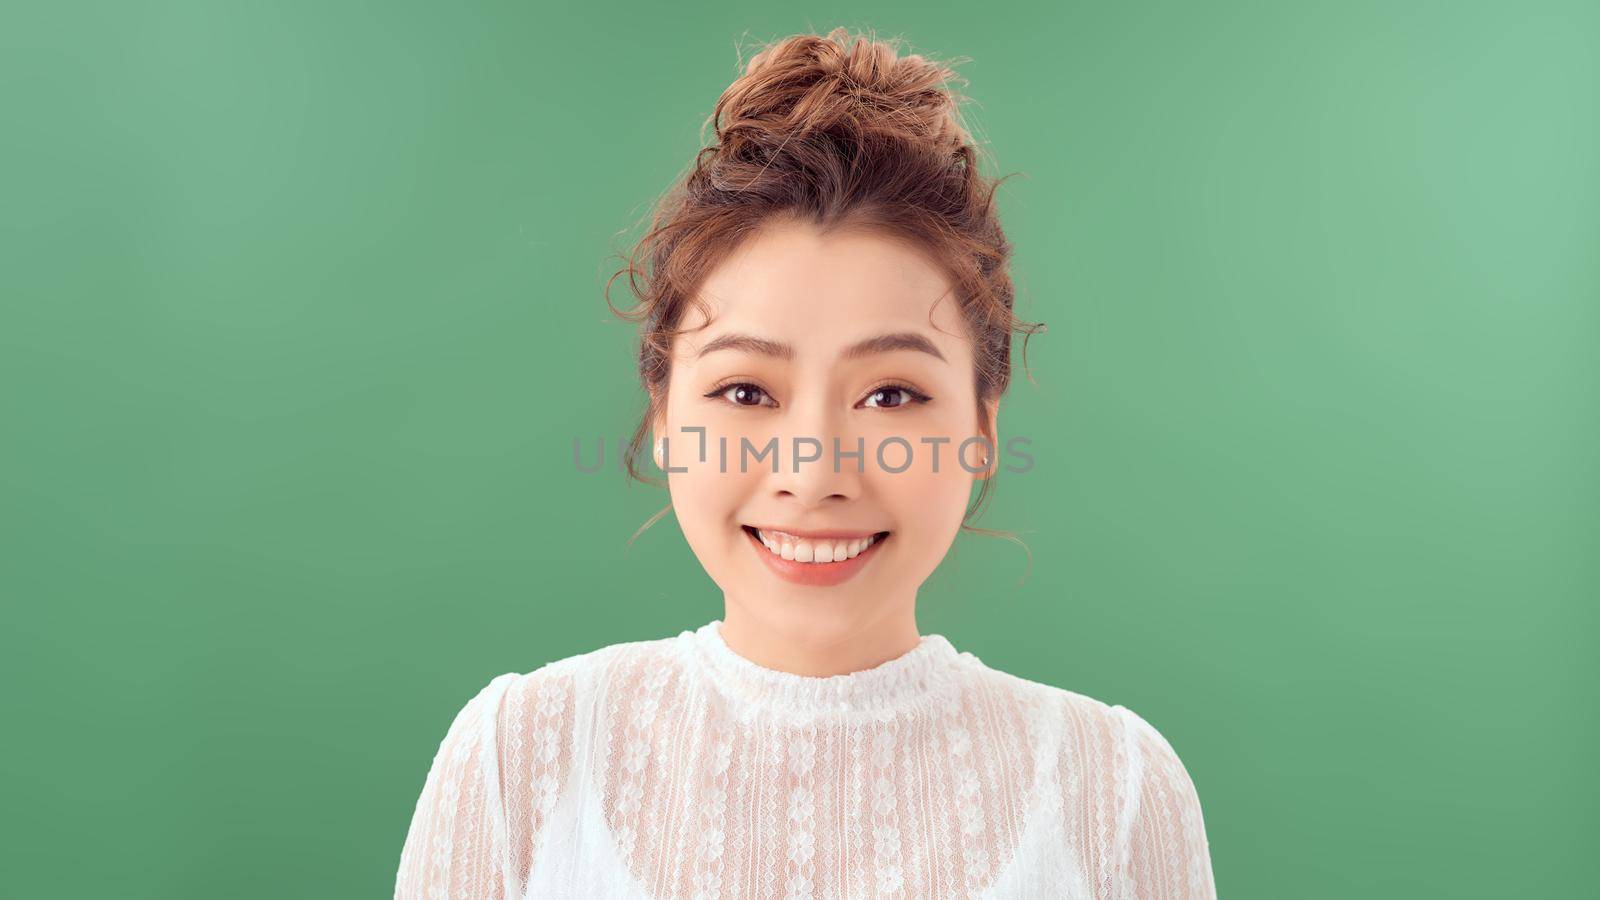 lifestyle and people concept:Young happy woman with curly hair